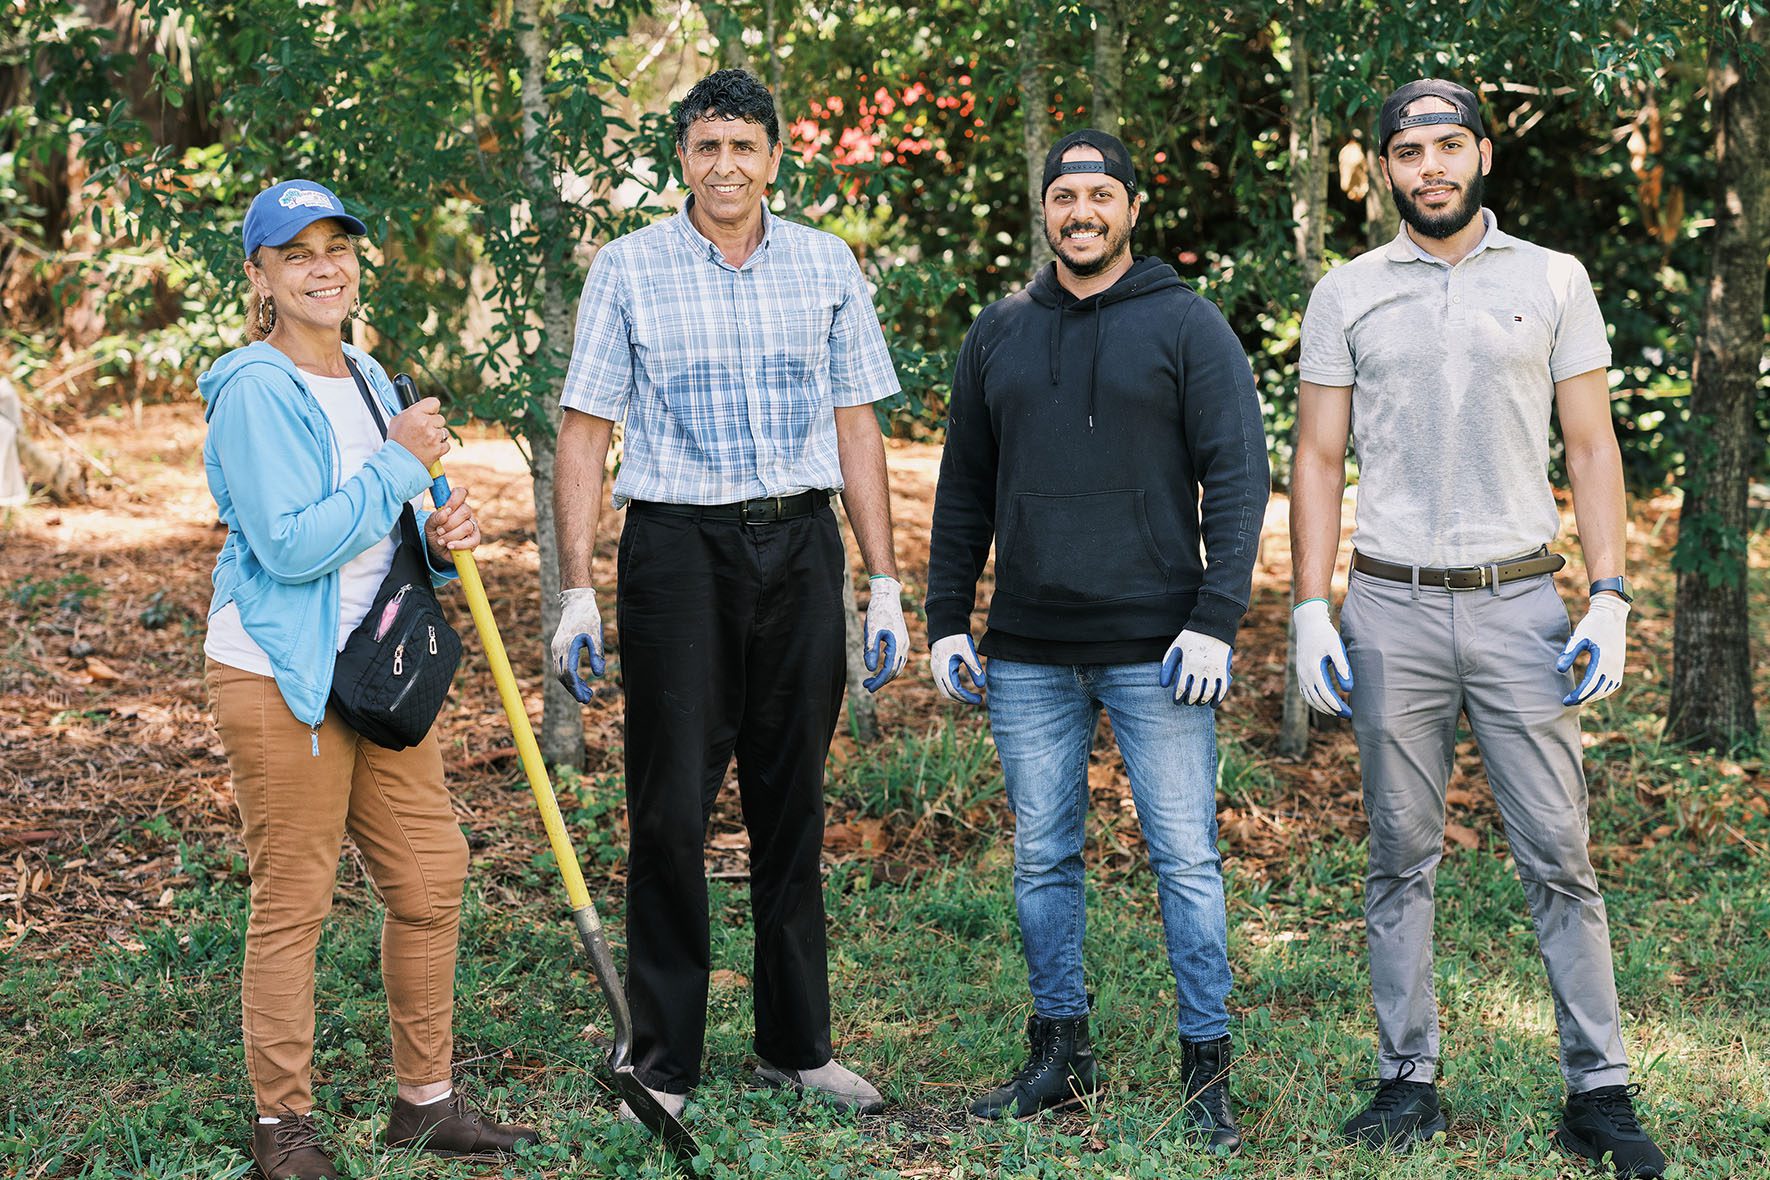 (Left to Right) Sylvia Acevedo, senior director of refugee and employment services at Gulf Coast JFCS; Rahmattulah Hamkar; Abdel Dana Roca, director of refugee integration; and Abdul Rauf Ghayour, refugee career coach; pose for a portrait together a hard day's work in the Refugee Garden. | Community Garden for Refugees Offers Belonging & a Taste of Home | HIAS